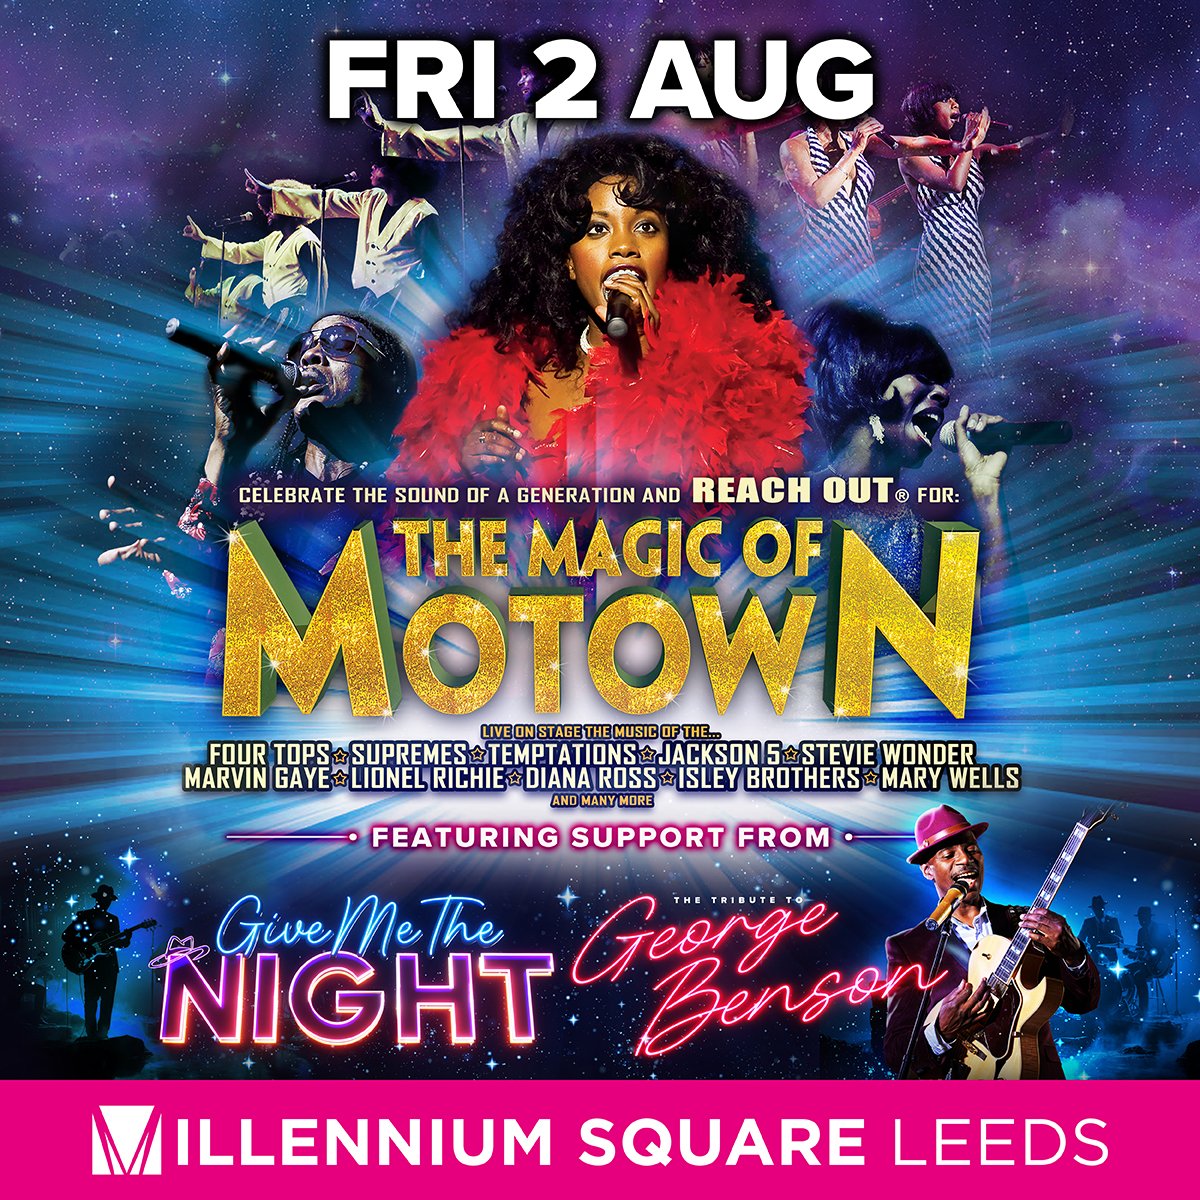 We're taking you down memory lane this summer with two unmissable tribute headline shows 👇 🌟Legend - The Music Of Bob Marley Thursday 1 August 2024 bit.ly/SS24Legend 🌟 @MagicOfMotown with support 'Give Me The Night' Friday 2 August 2024 bit.ly/SS24Motown